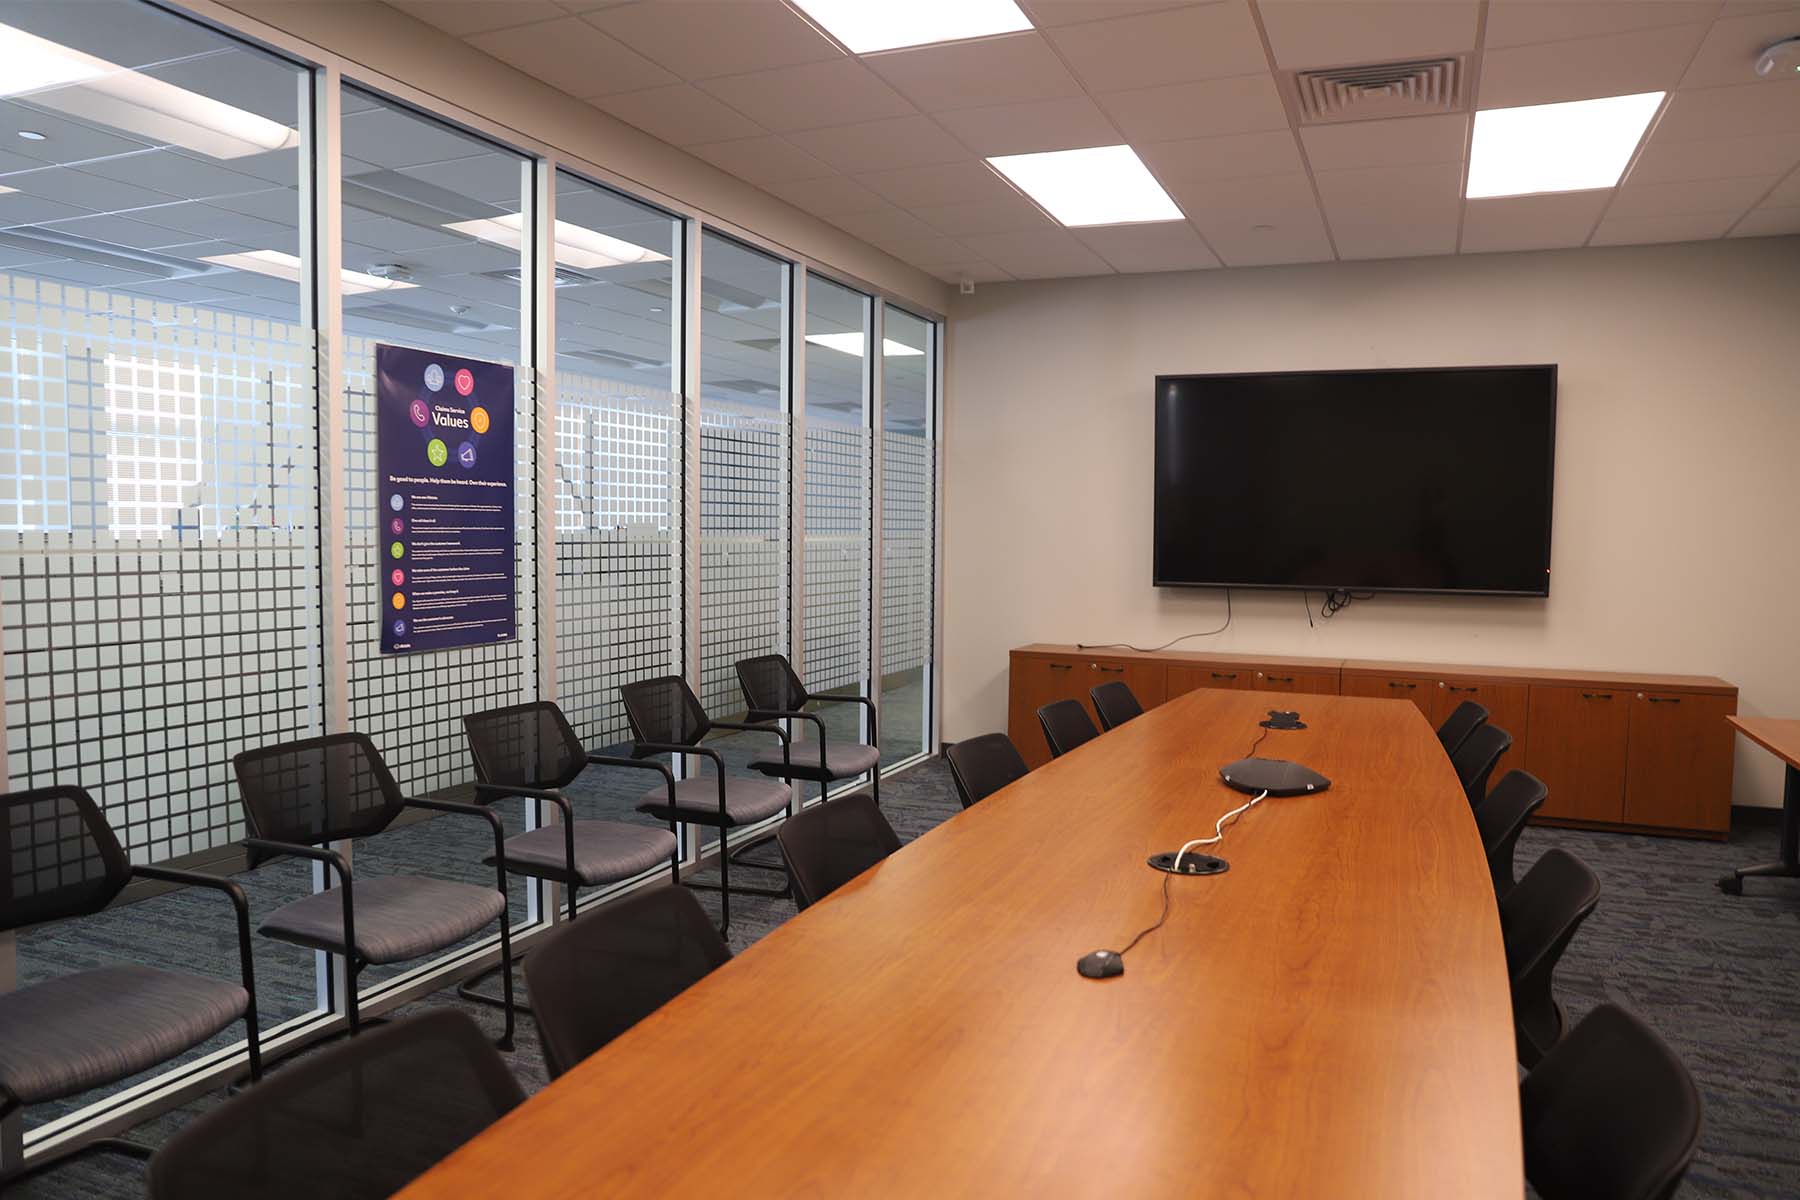 Conference room with a TV mounted on the wall, and large windows looking into open office space